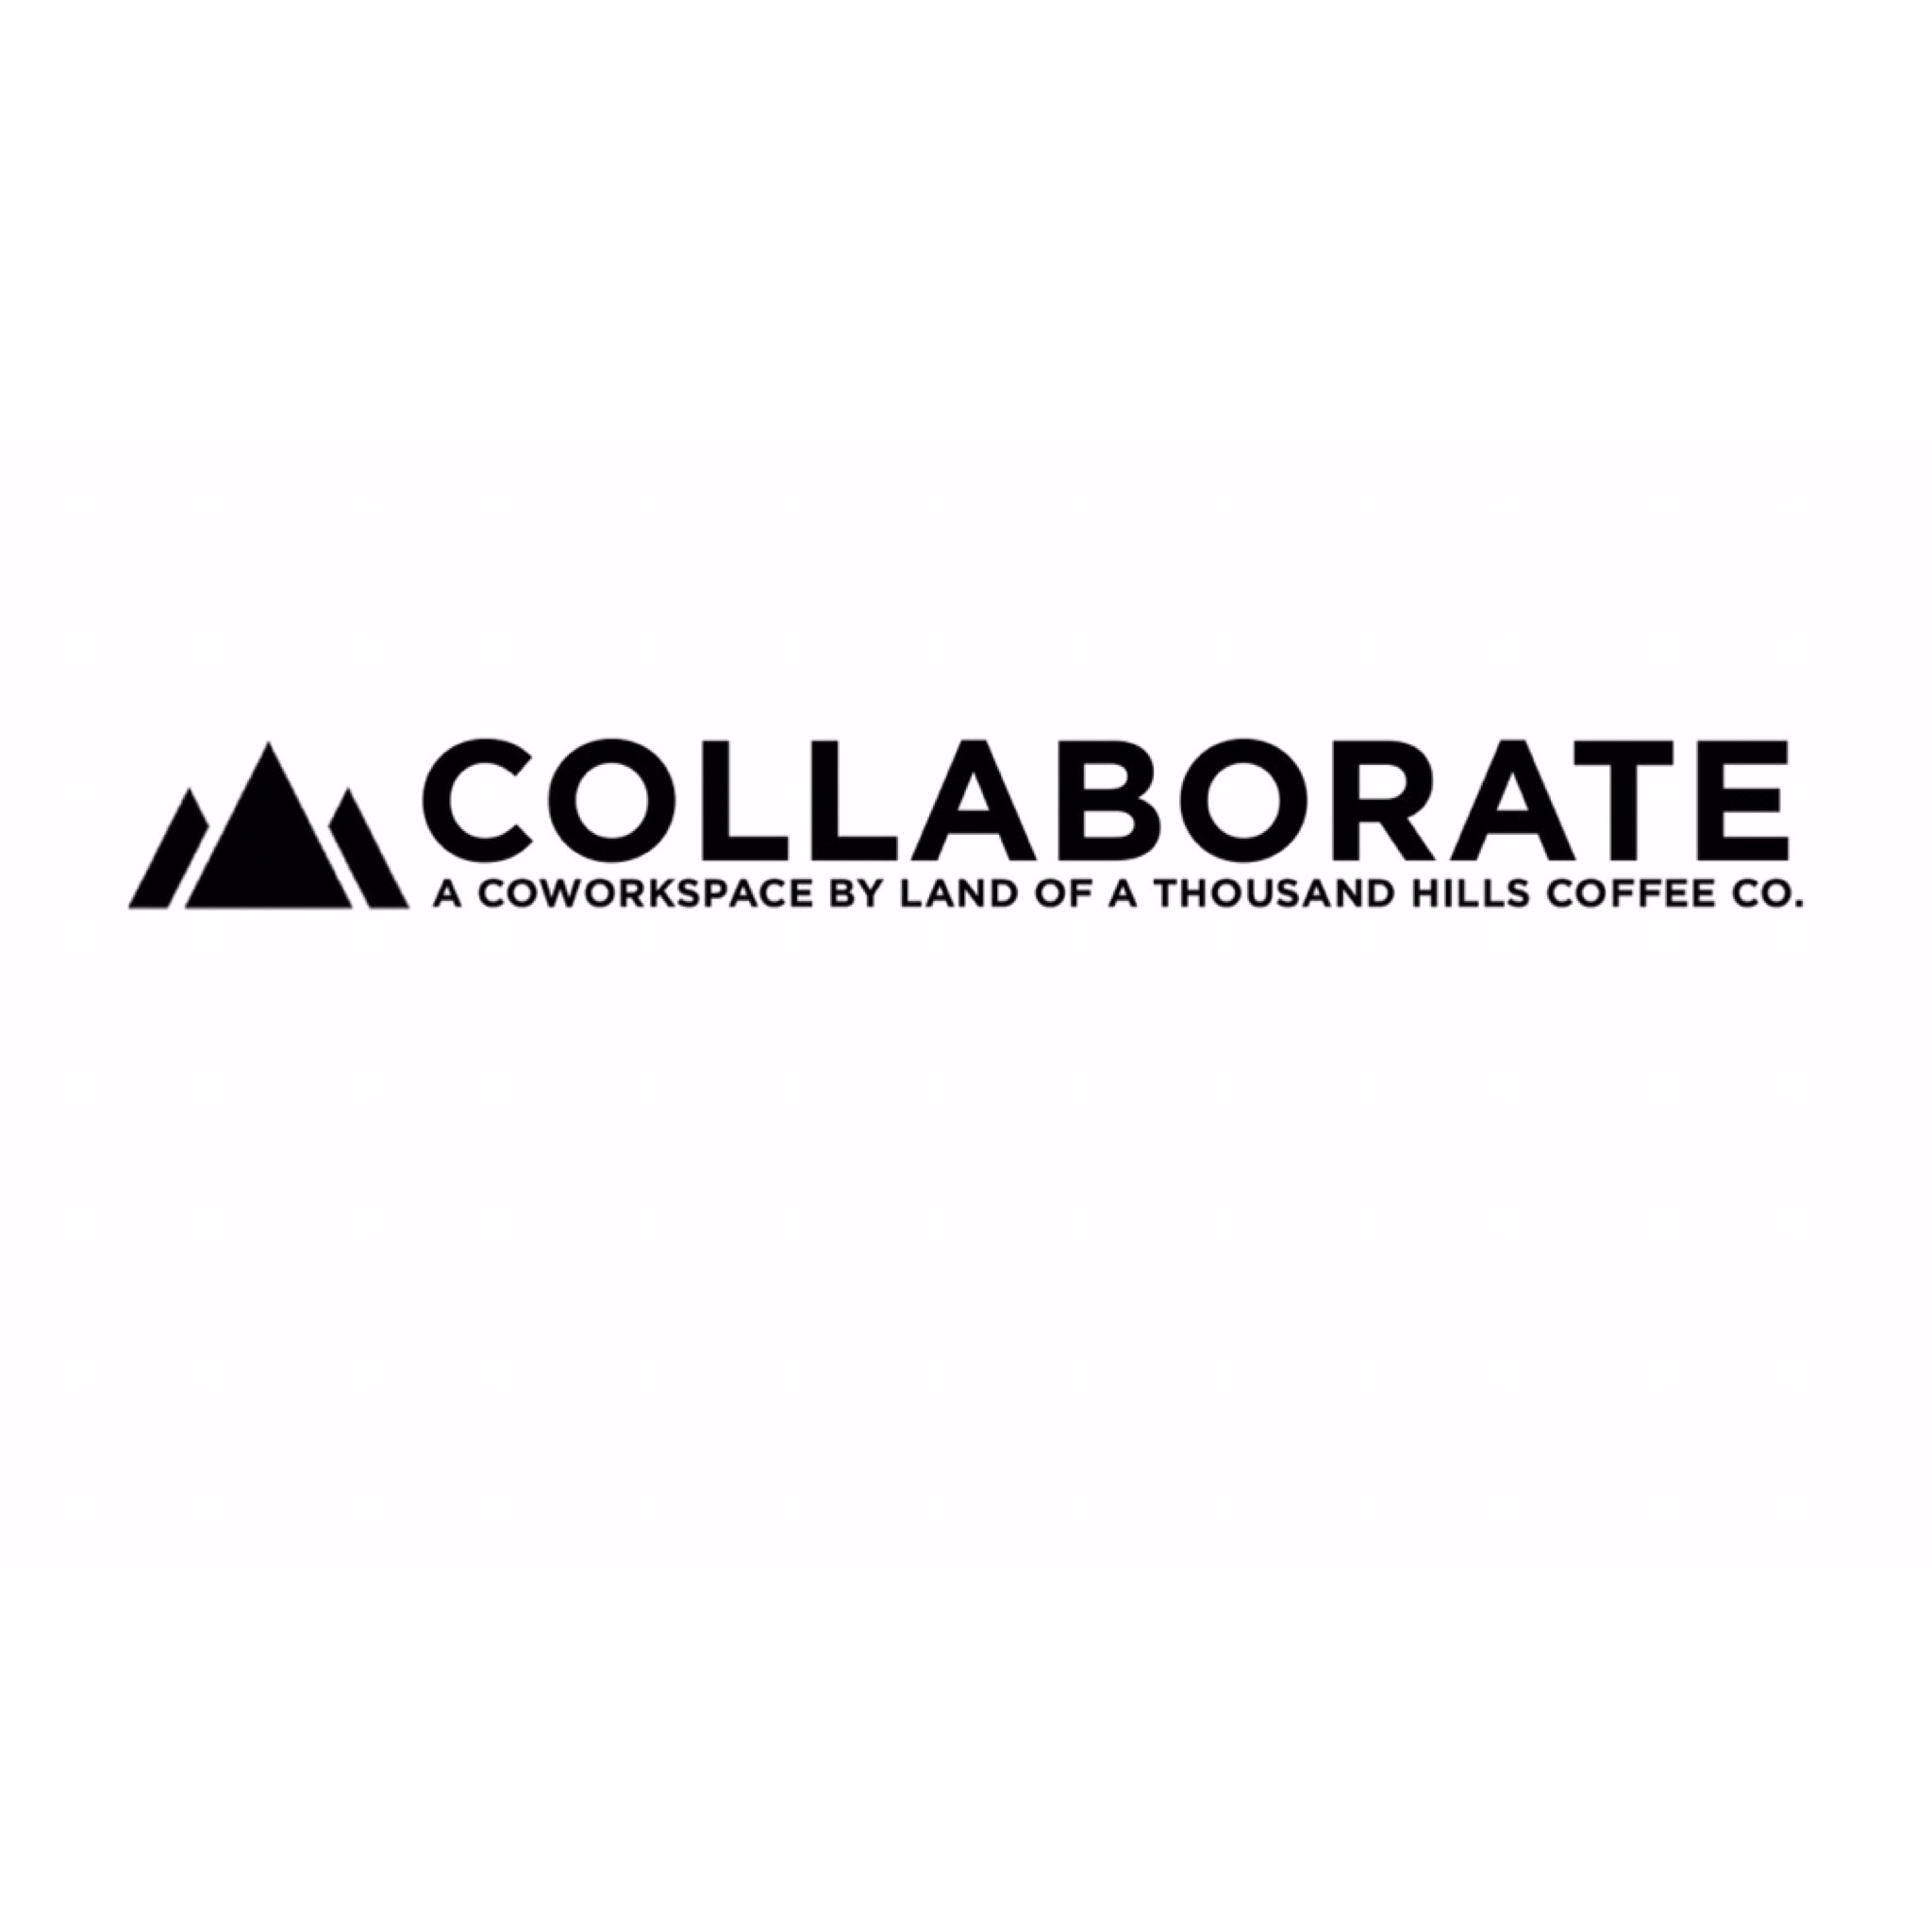 The Collaborate!
A Co-working space by Land of A Thousand Hills Coffee Company.
Creating a Community of Professionals.